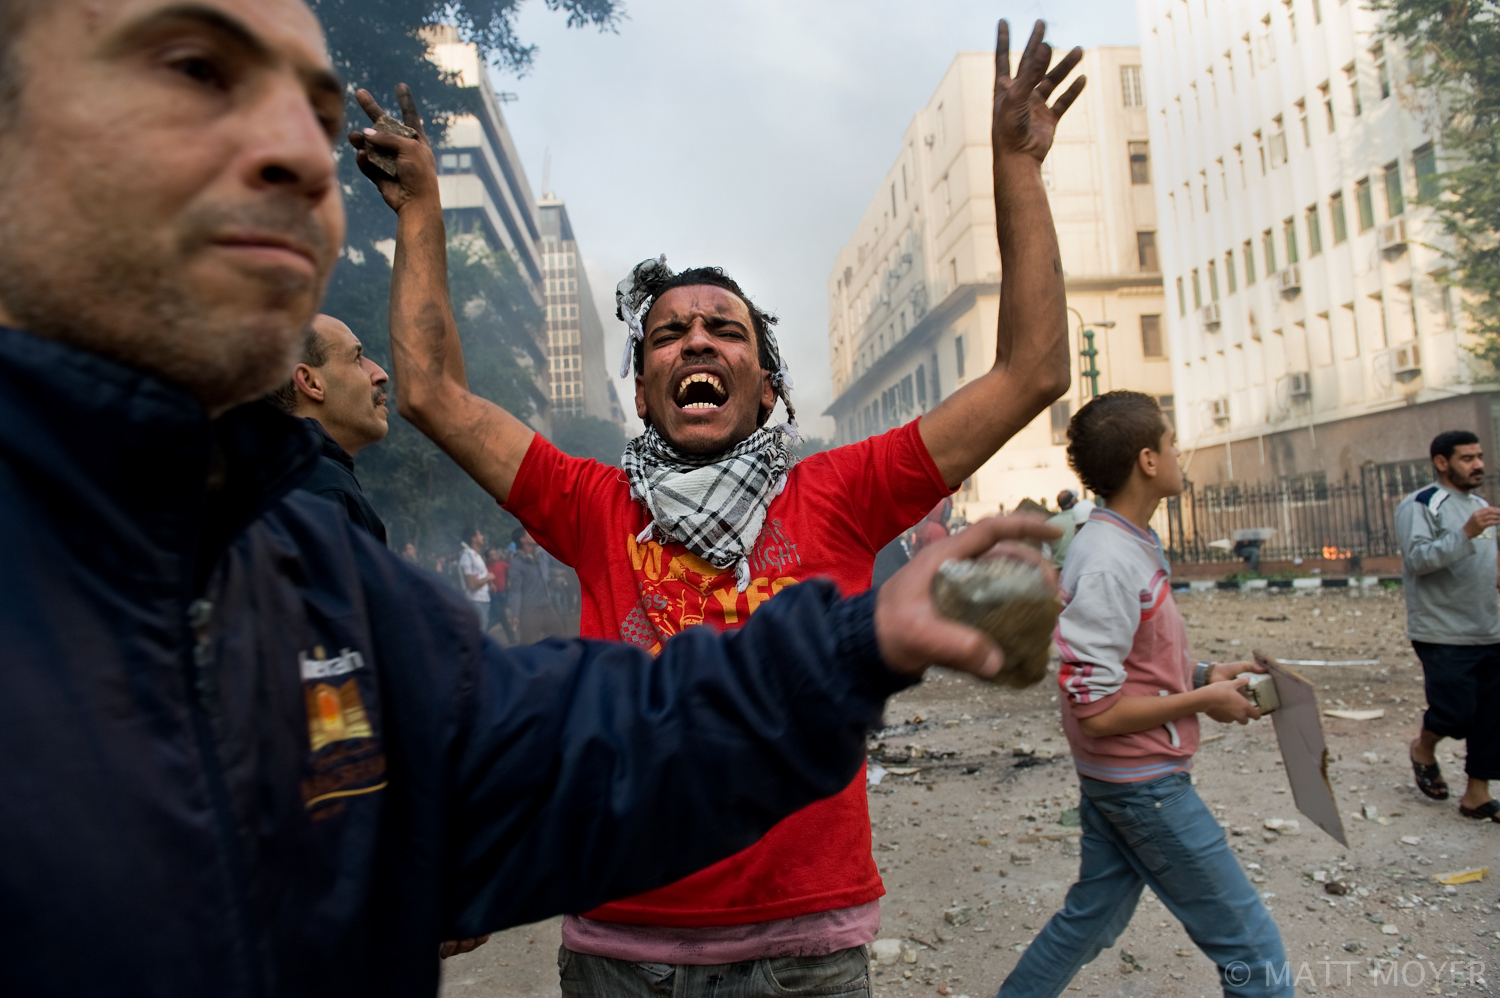  An Egyptian protester reacts as others prepare to throw stones at government forces during clashes that erupted after a pro-democracy sit-in was forcefully broken up by government troops in Cairo, Egypt. 